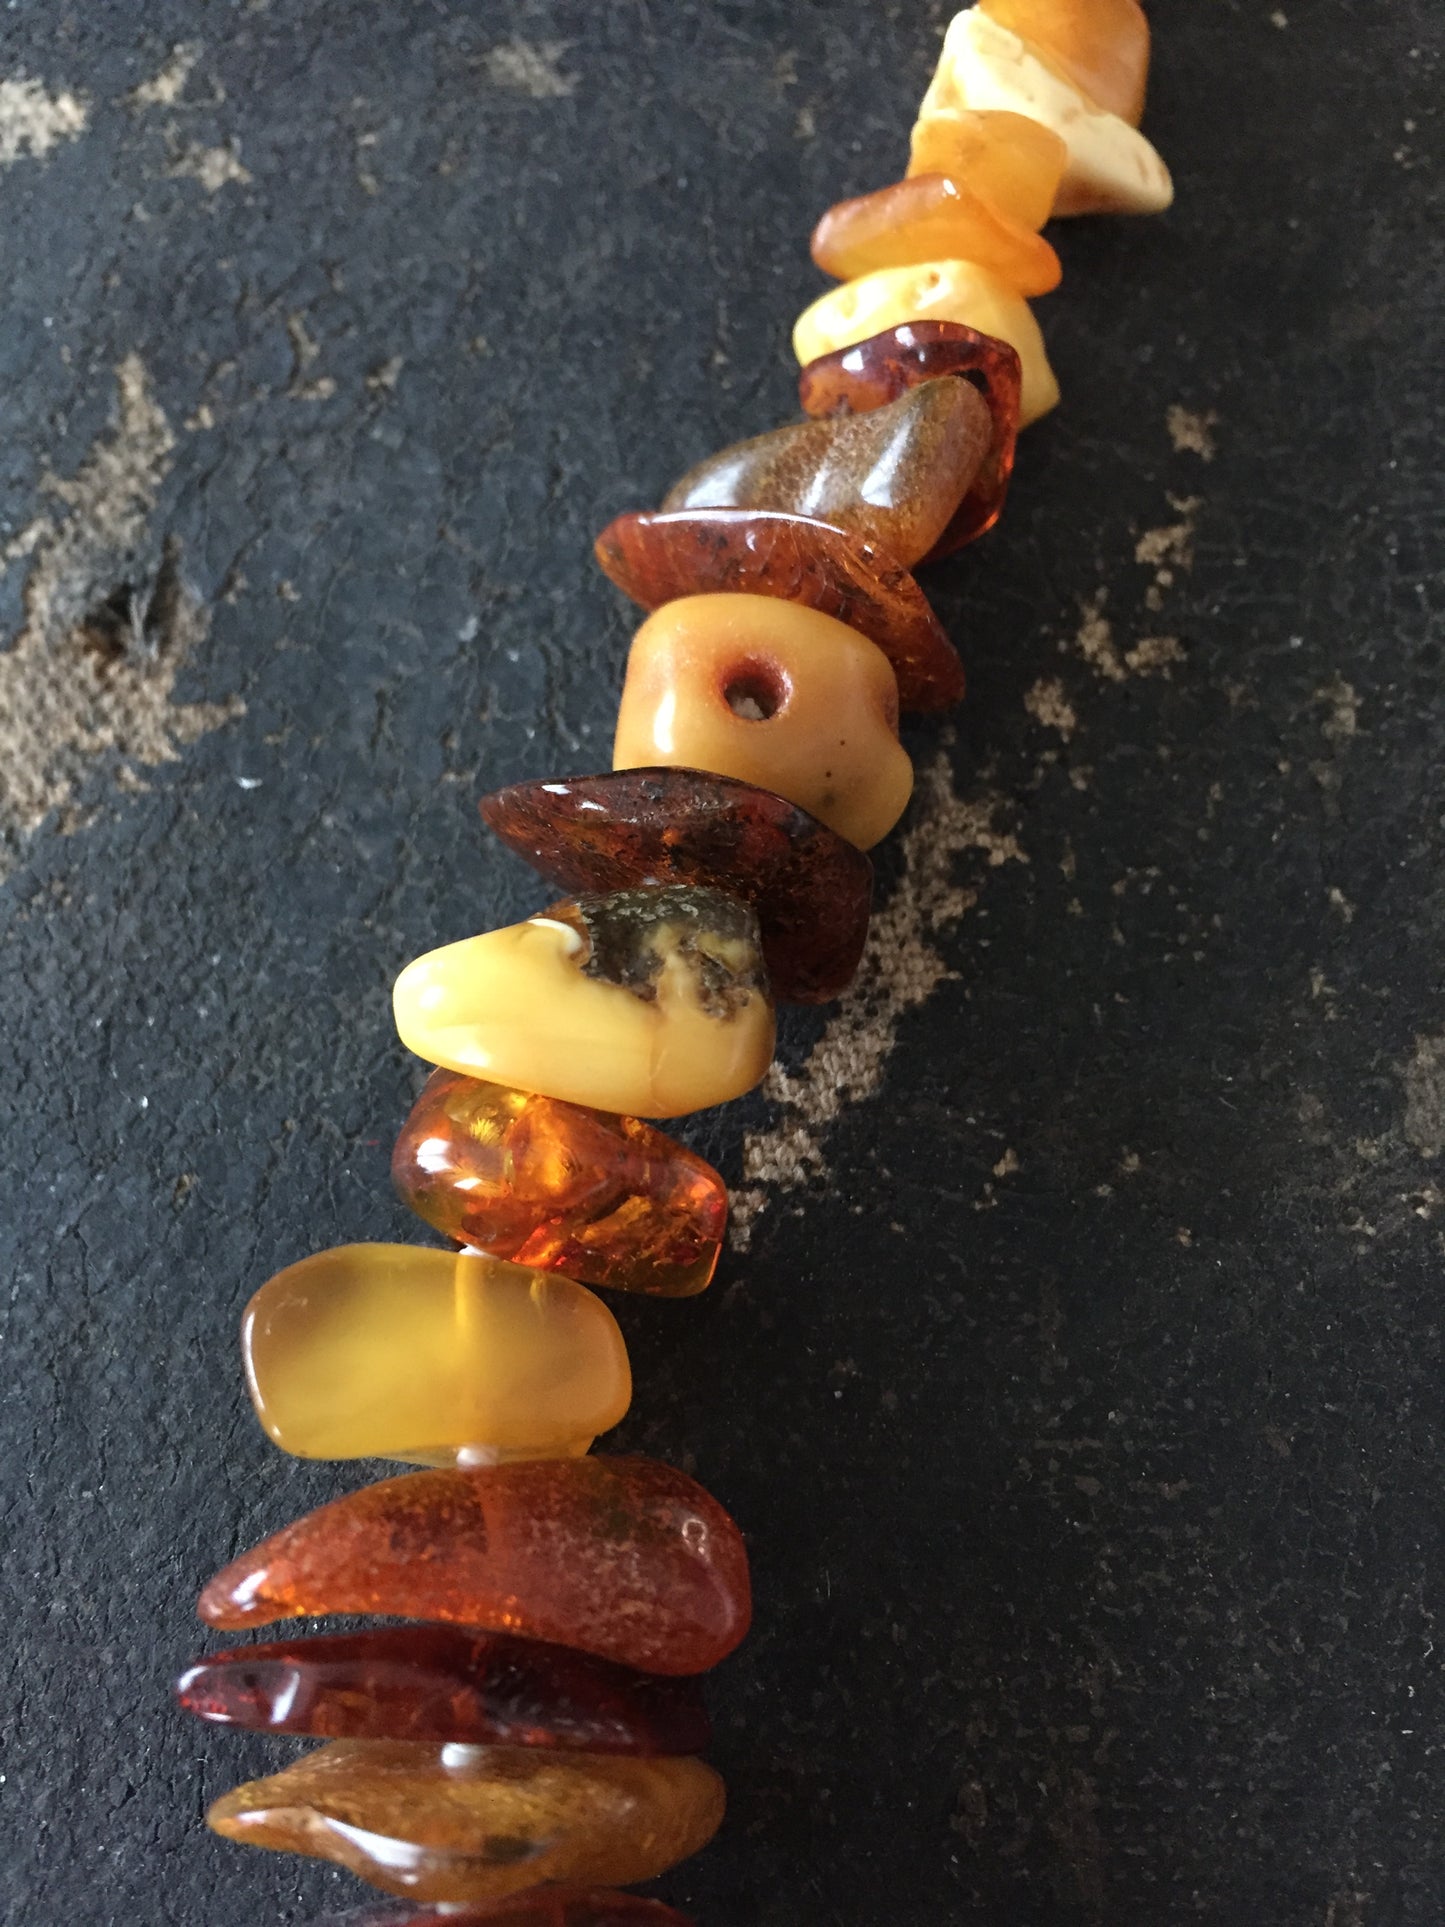 Stunning Chunky Copal Necklace Natural Polished Resin